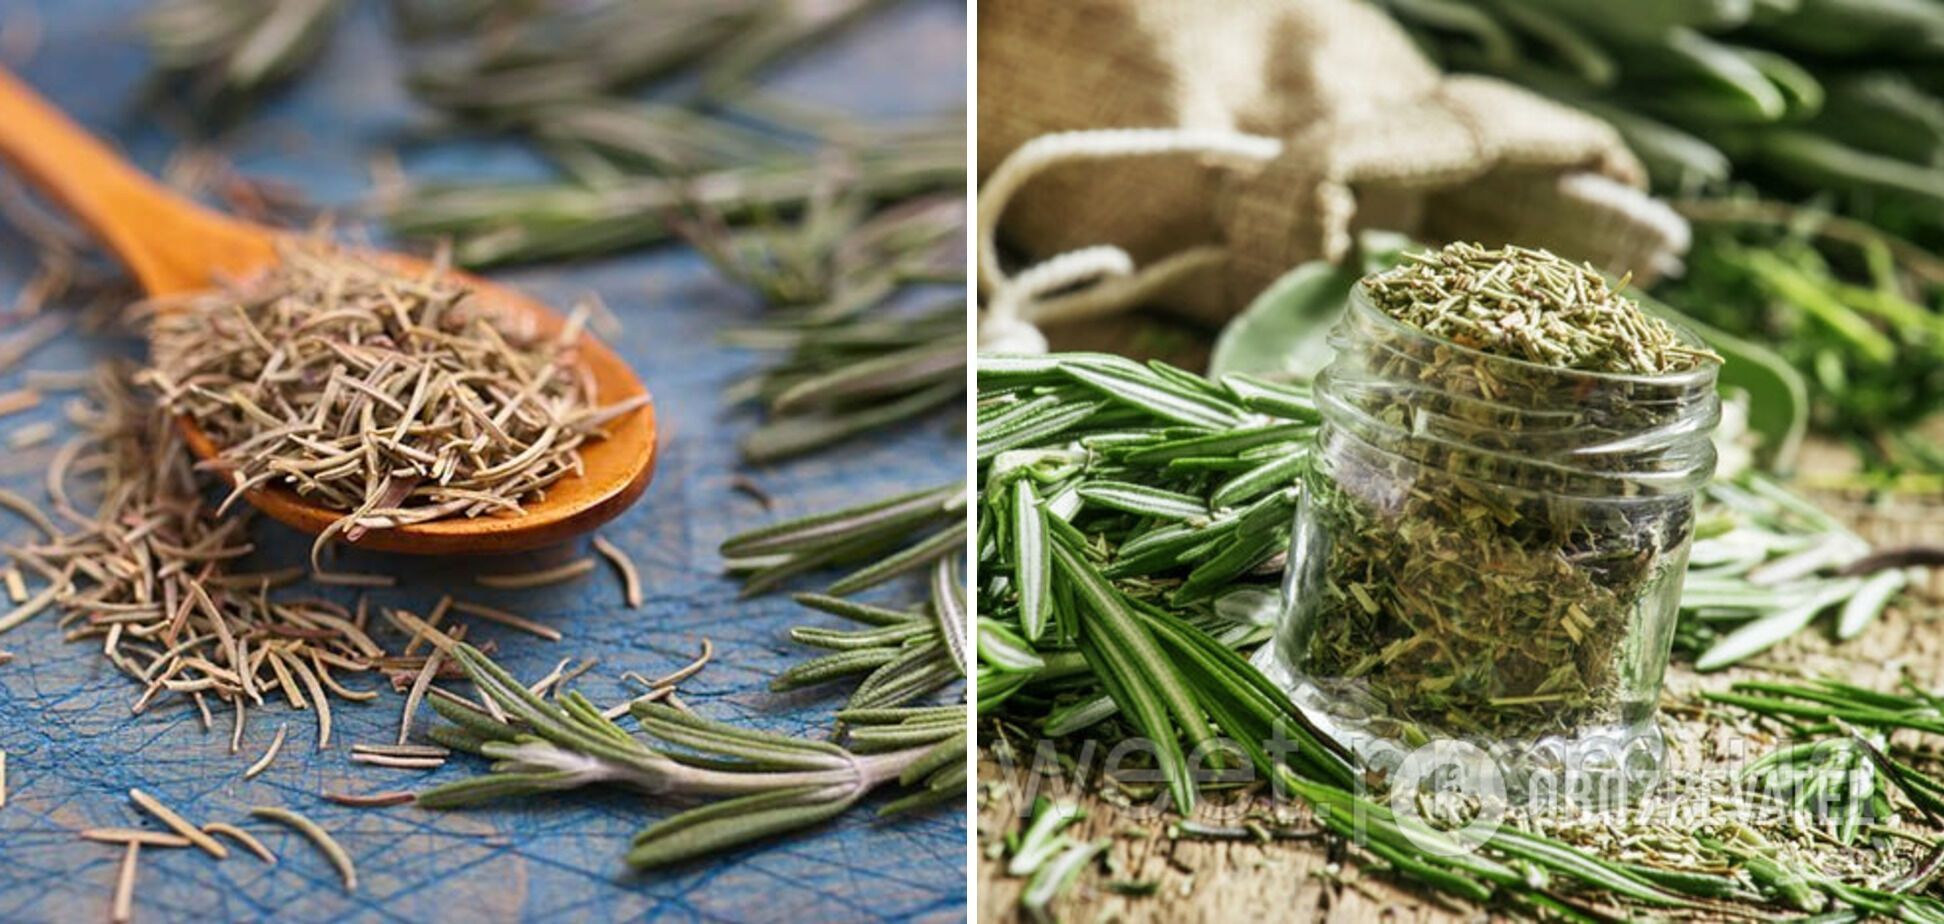 Rosemary for spice